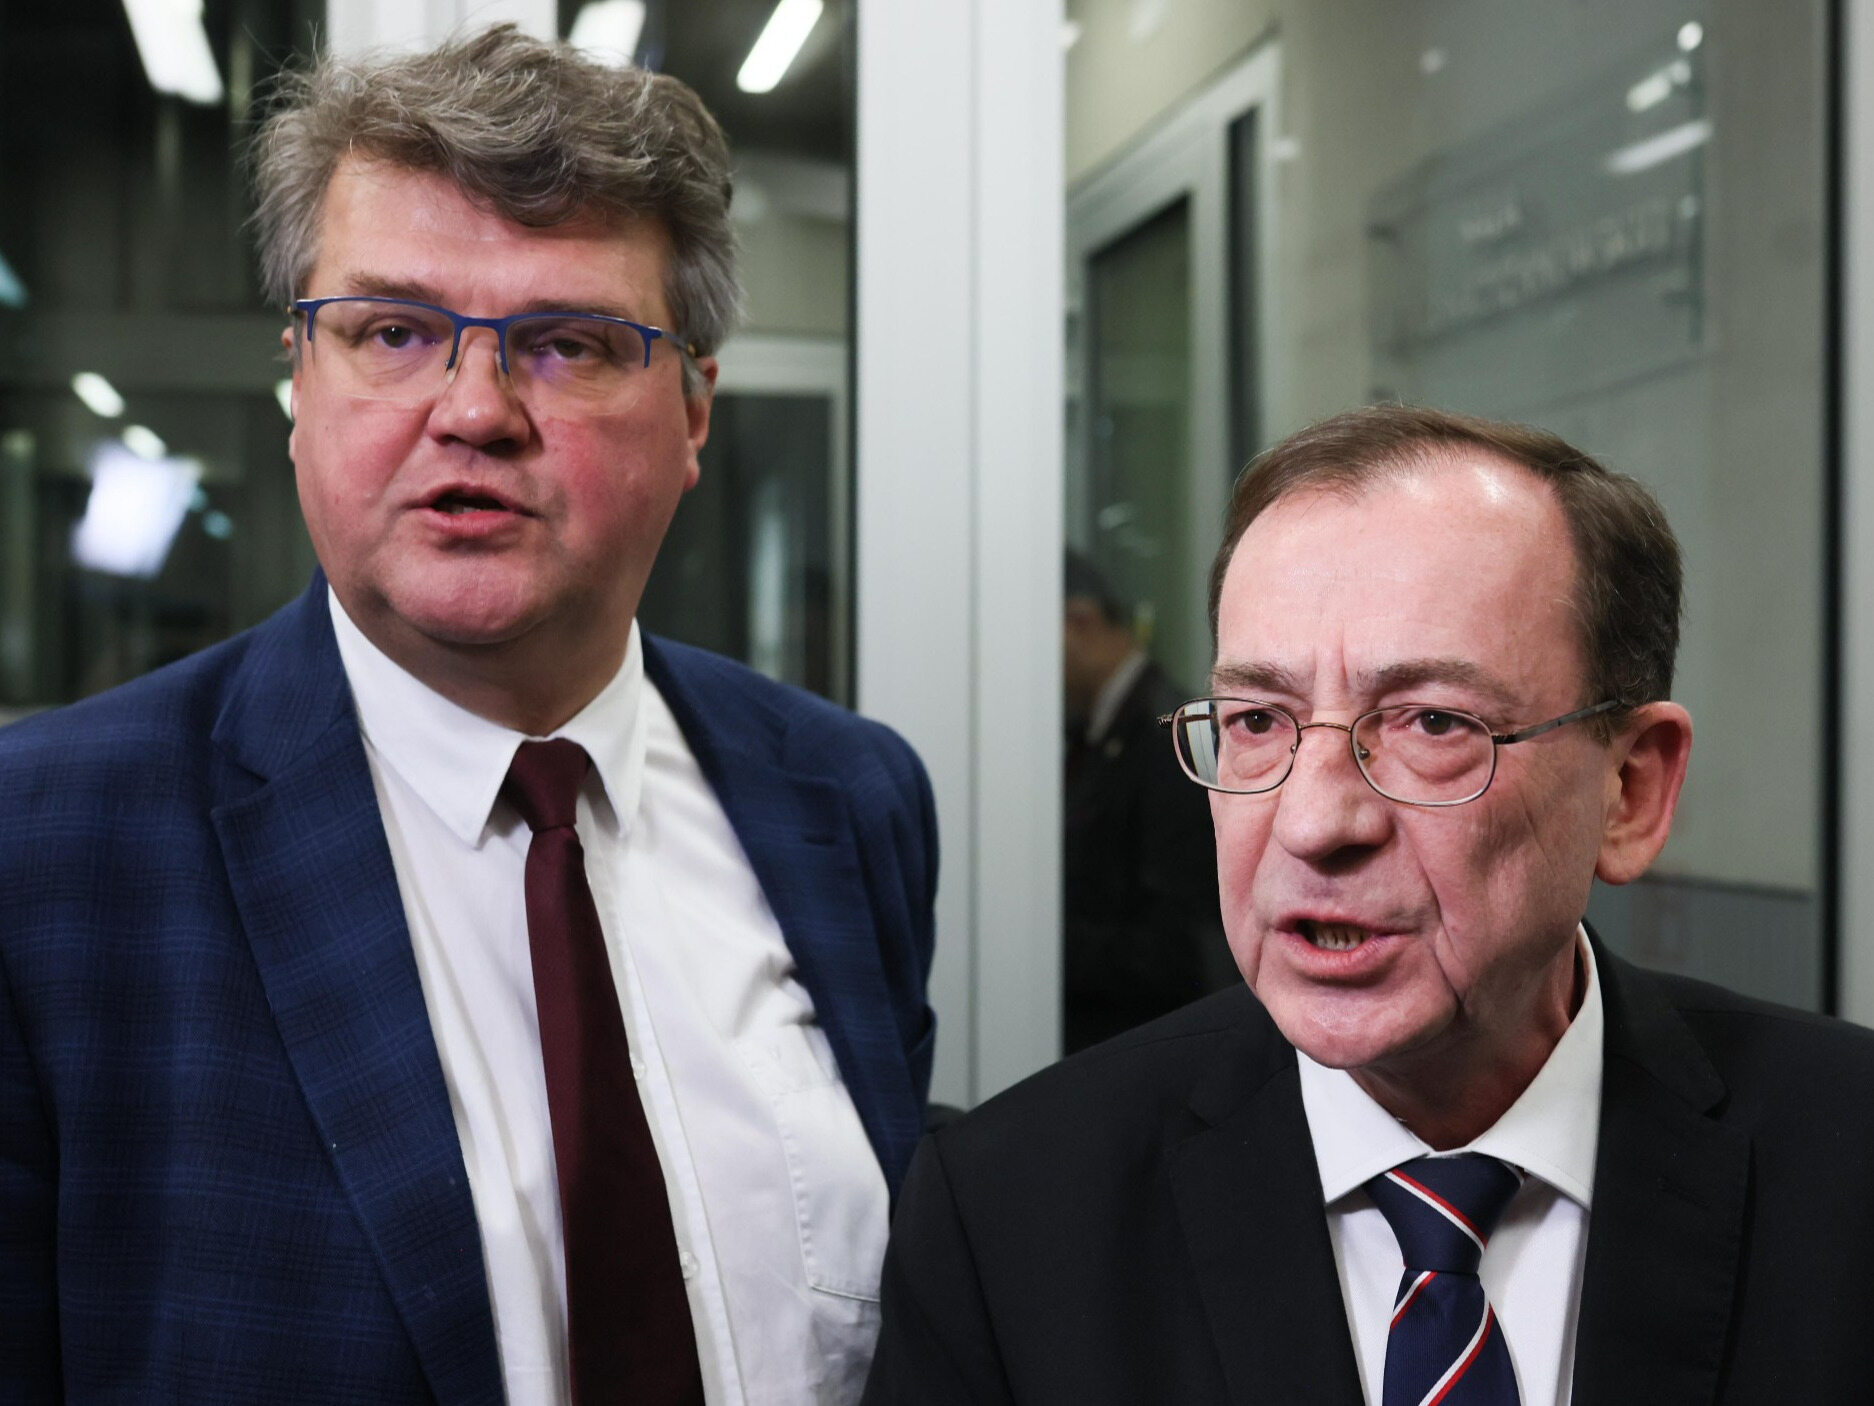 Kamiński and Wąsik are not giving up.  They intend to fight to keep their parliamentary seats